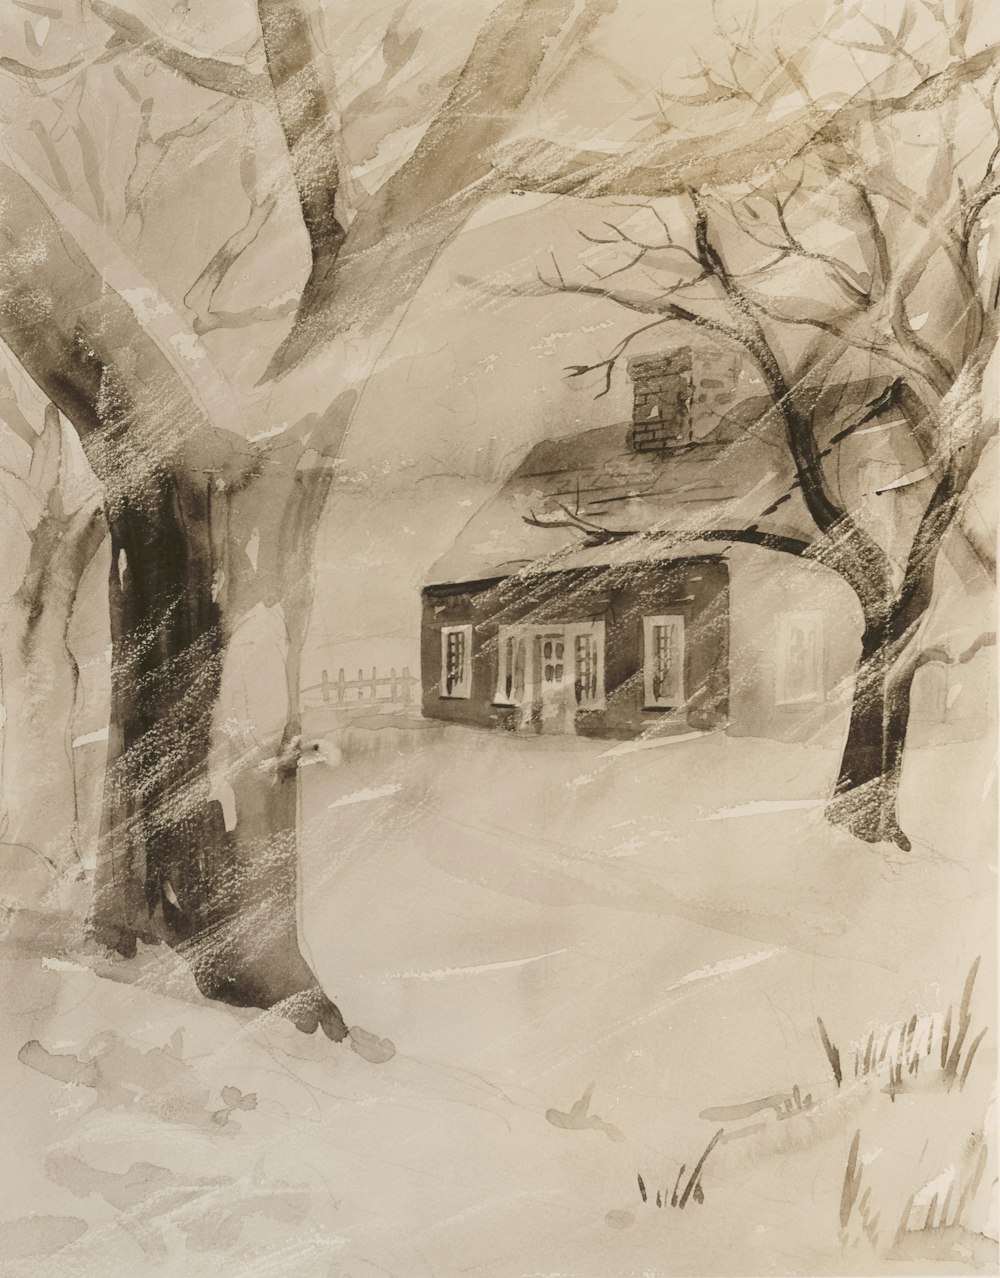 a drawing of a house in the snow